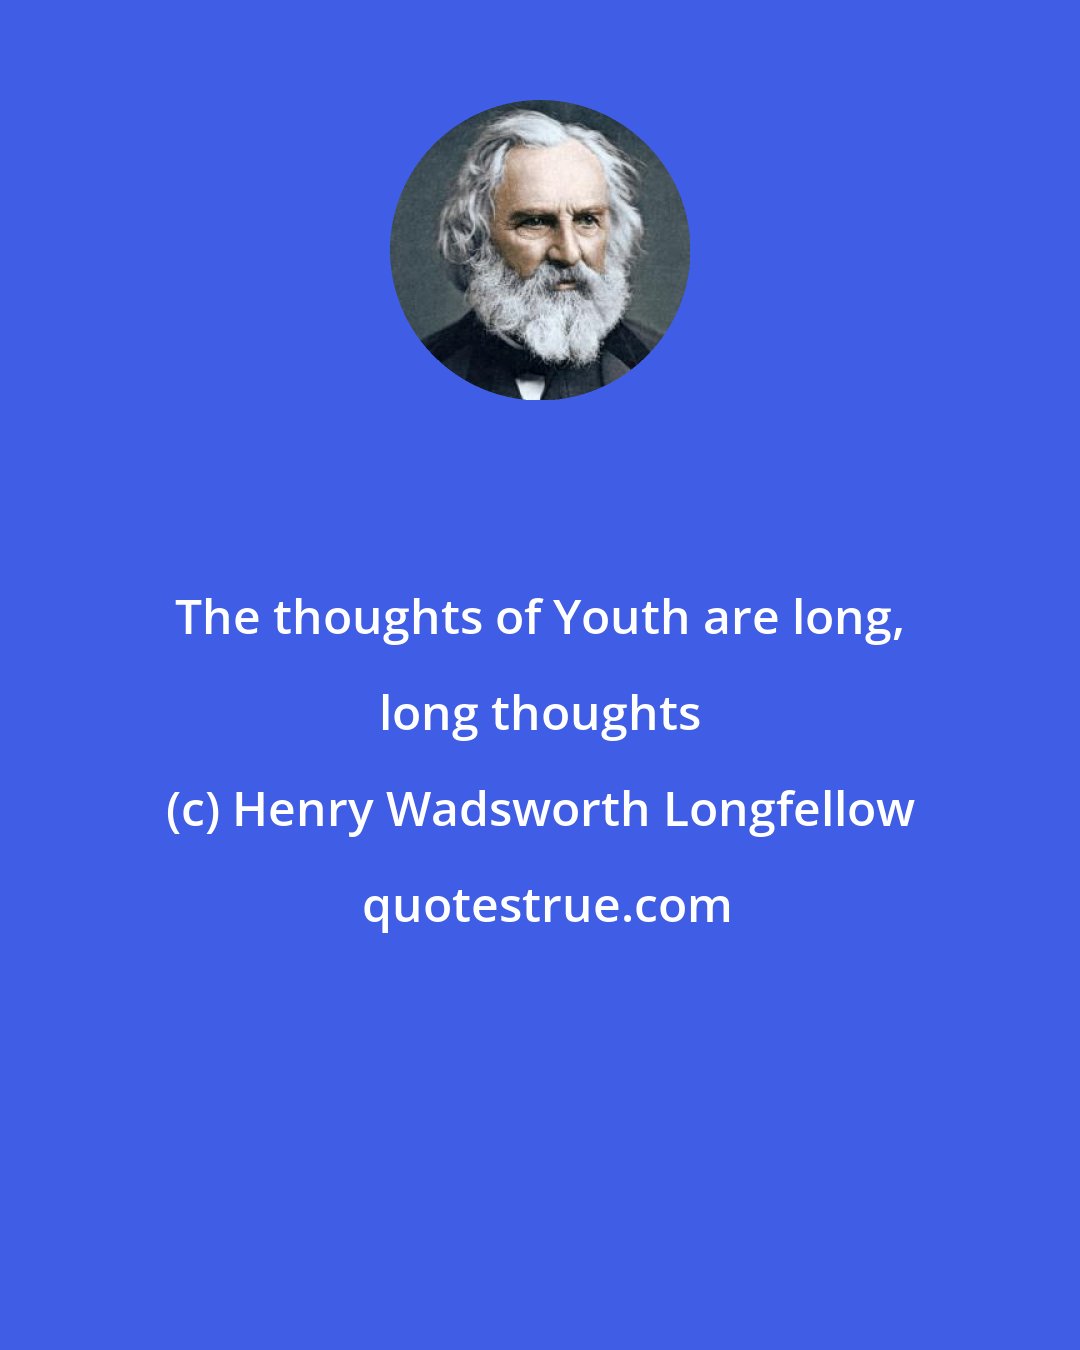 Henry Wadsworth Longfellow: The thoughts of Youth are long, long thoughts